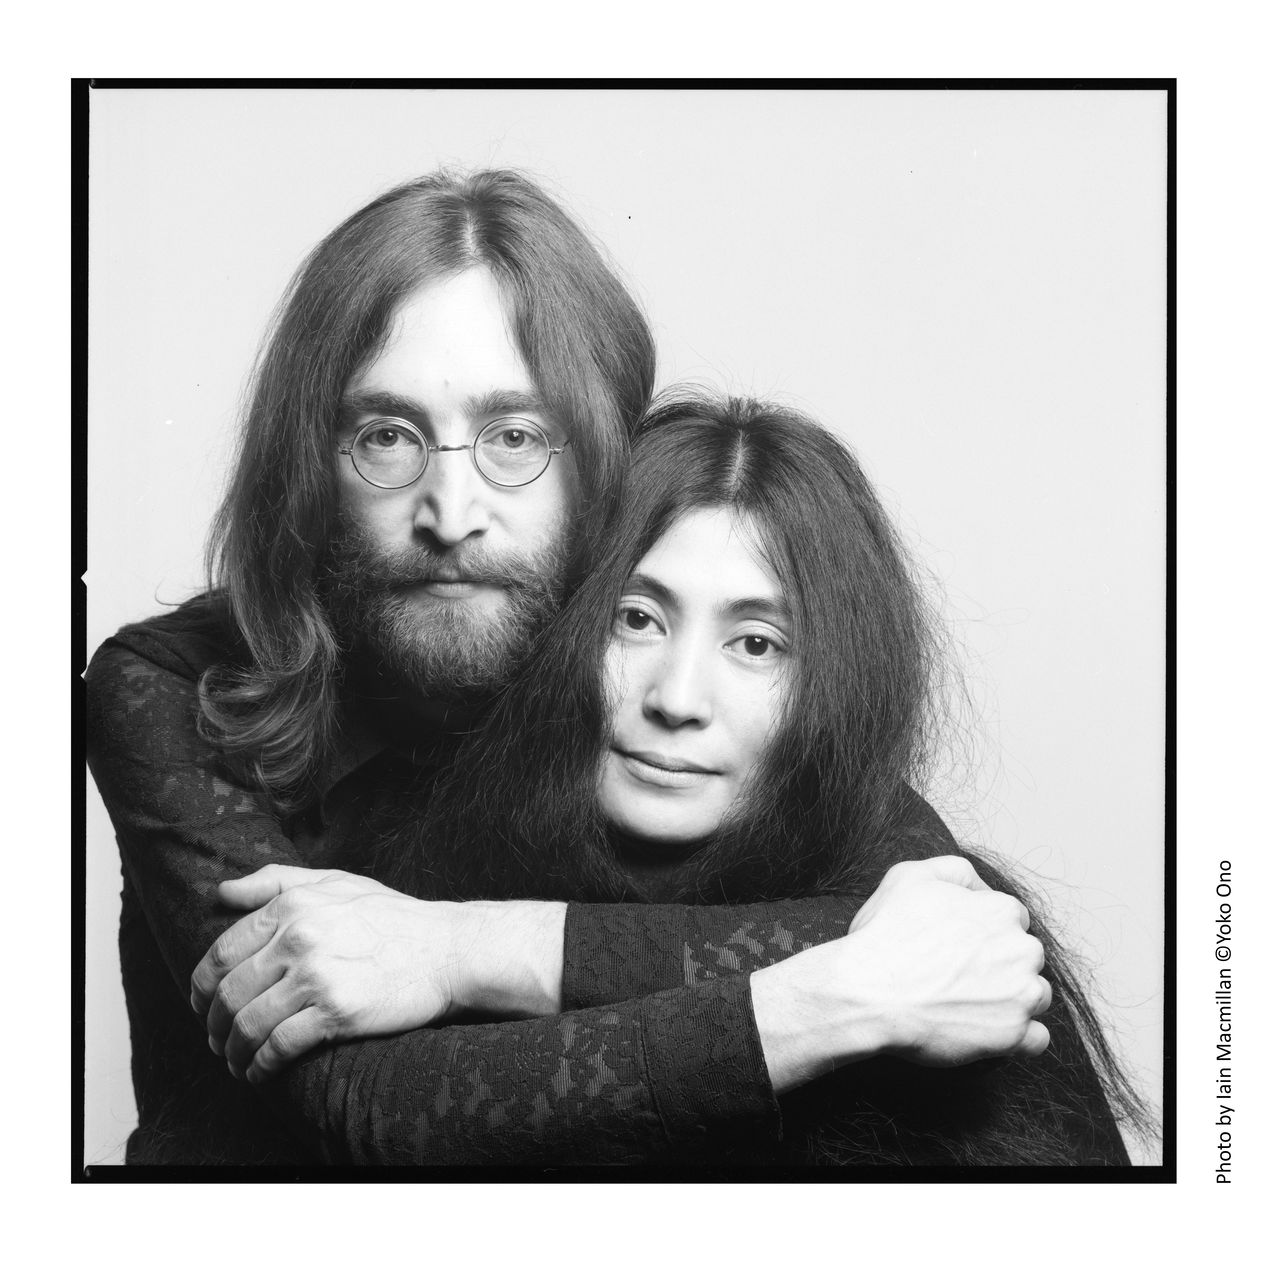 The Double Fantasy: John & Yoko exhibition attracted 700,000 visitors when it was held in Liverpool. It is currently being held in Tokyo, where a Japan Exclusive corner displays items showing the links between Lennon and Japan.